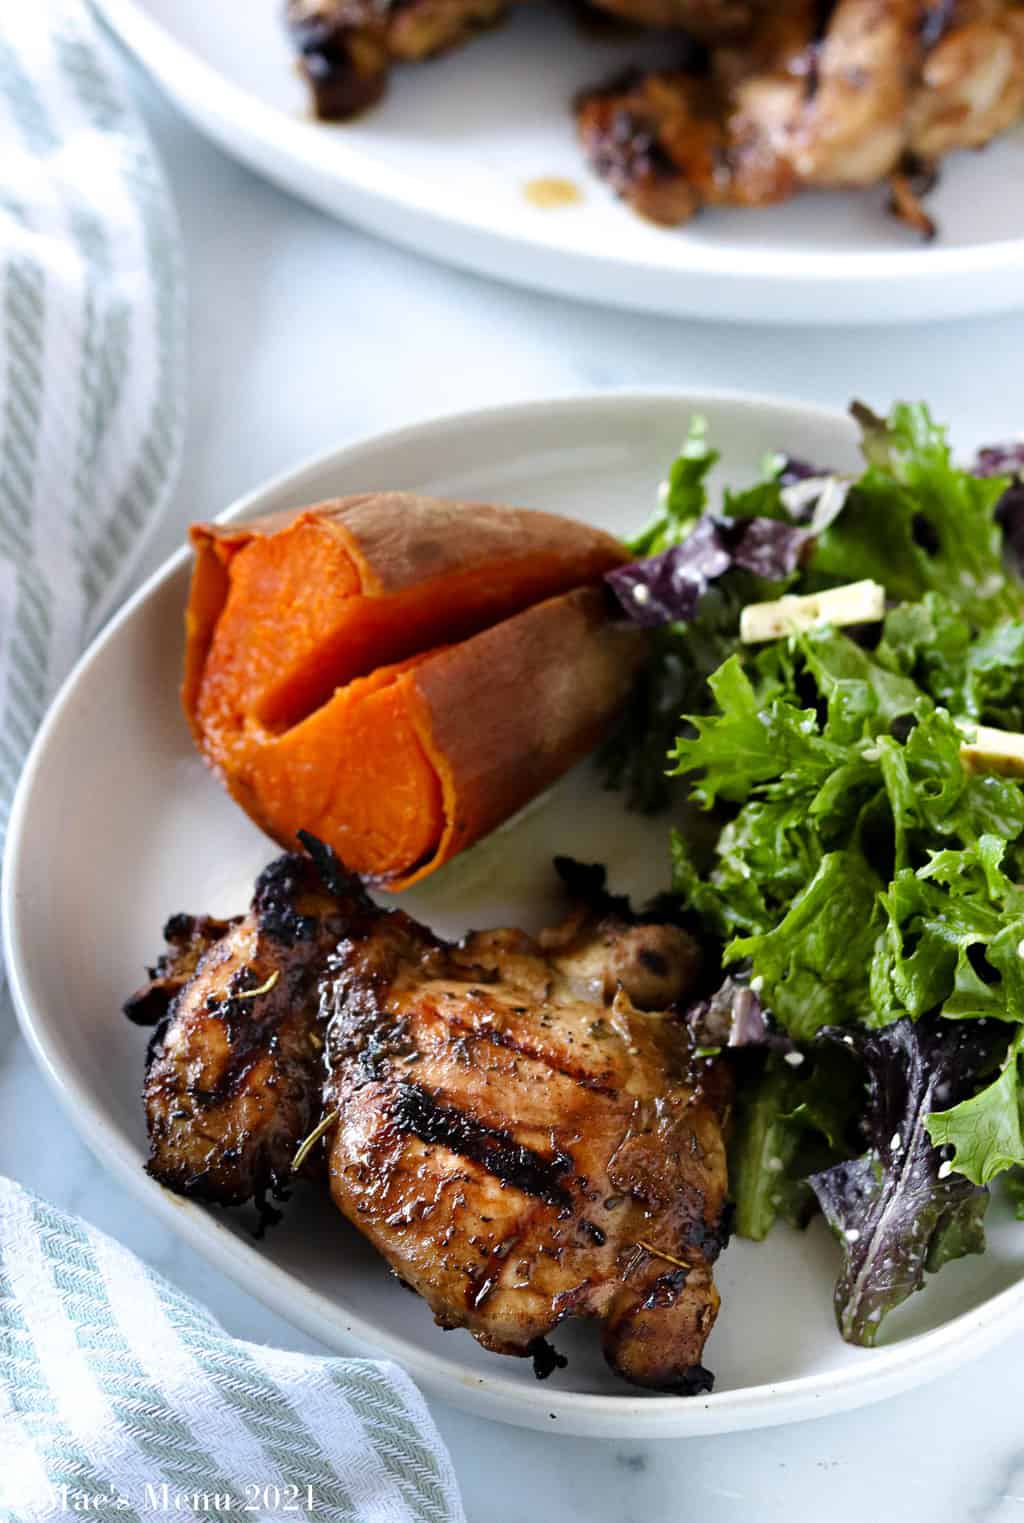 A plate of grilled chicken thighs, sweet potato, and salad